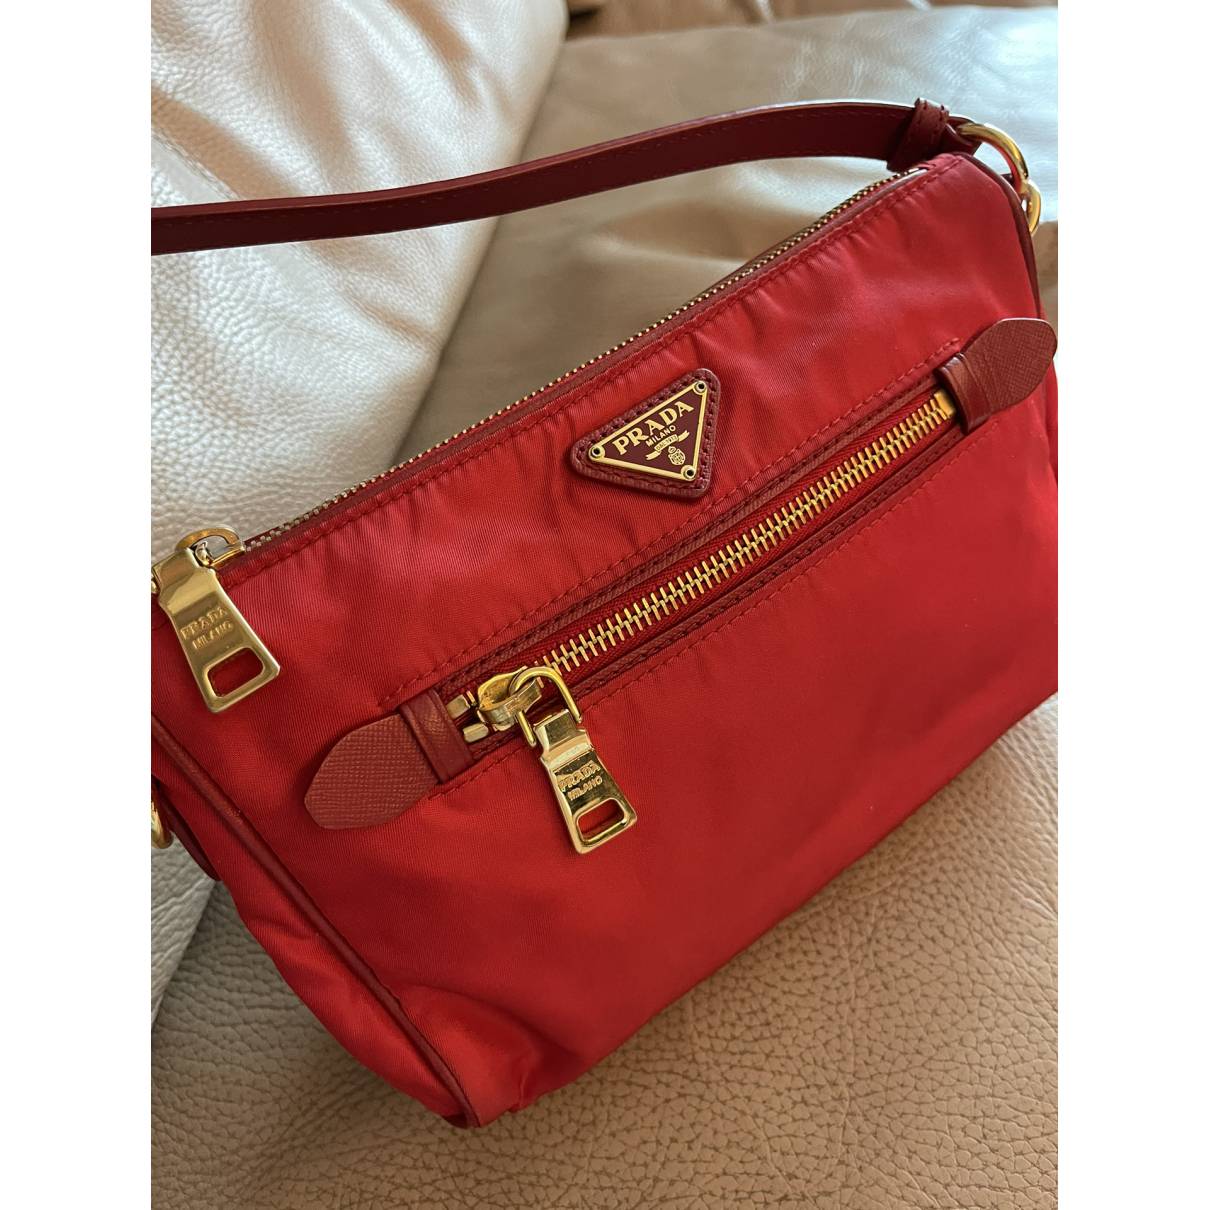 Prada - Authenticated Handbag - Synthetic Red Plain for Women, Good Condition